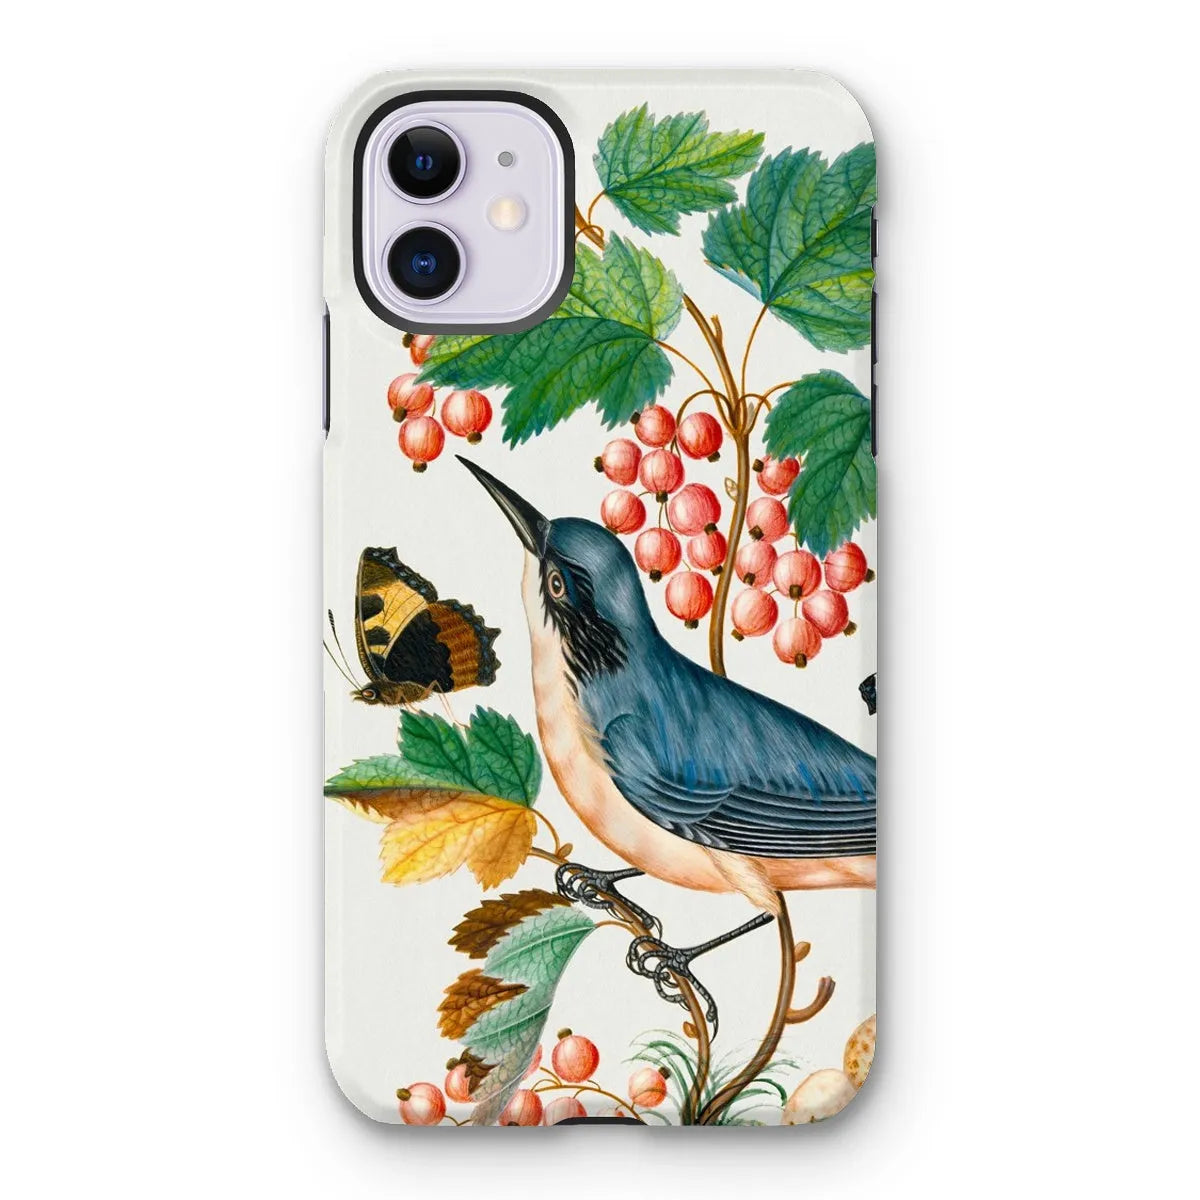 Warbler Admiral Wasps & Ants - Art Phone Case - James Bolton - Iphone 11 / Matte - Mobile Phone Cases - Aesthetic Art